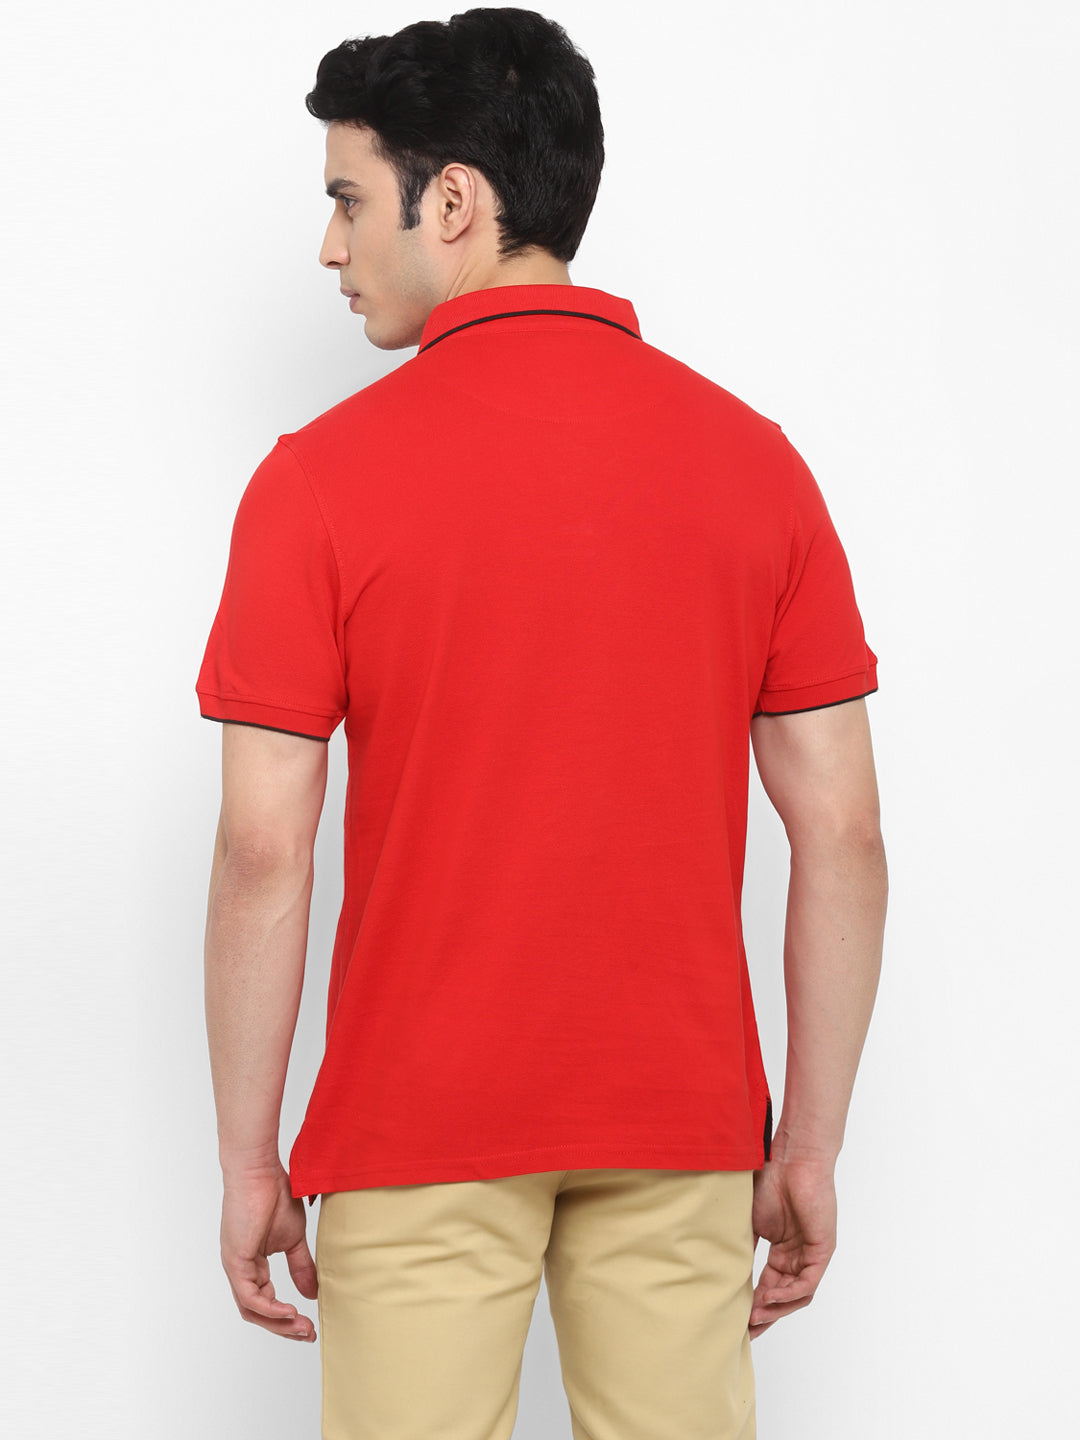 Solid Red Half Sleeve Polo T-Shirt for Men